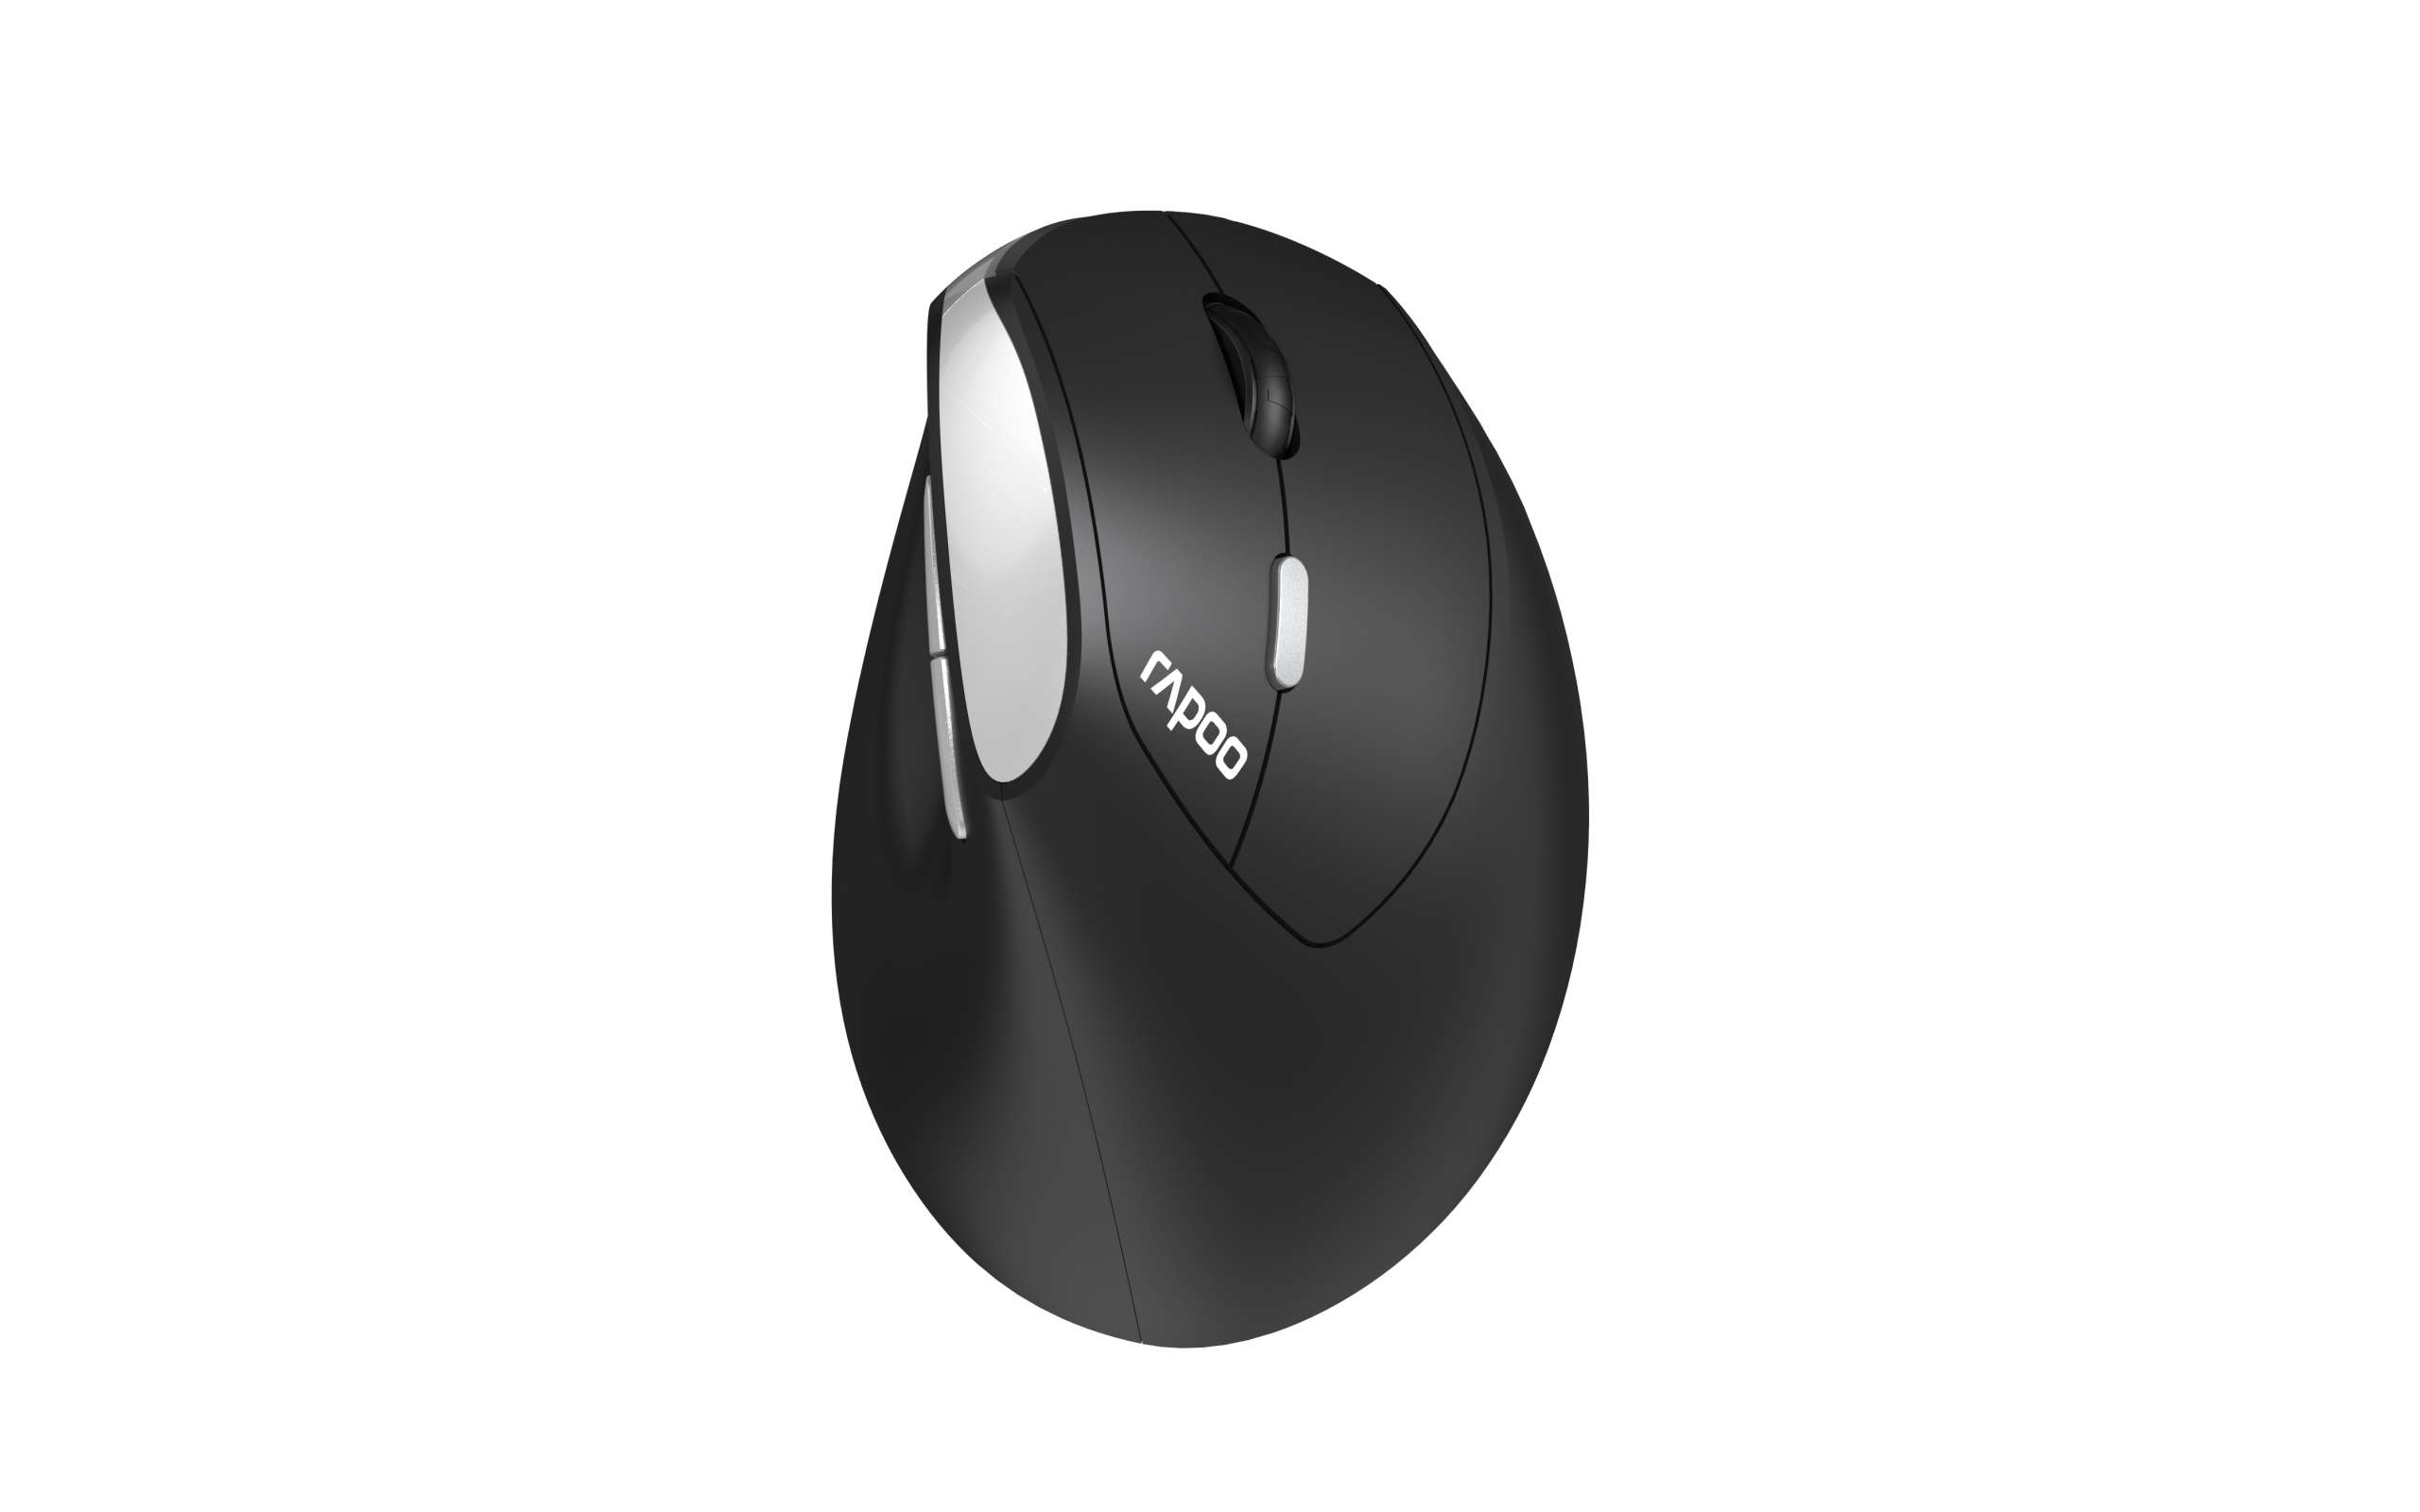 RAPOO EV250 Ergonomic Vertical Wireless Mouse 6 Buttons 800/1200/1600 DPI Optical Silent Click Mice - Black (Renamed from MV20)